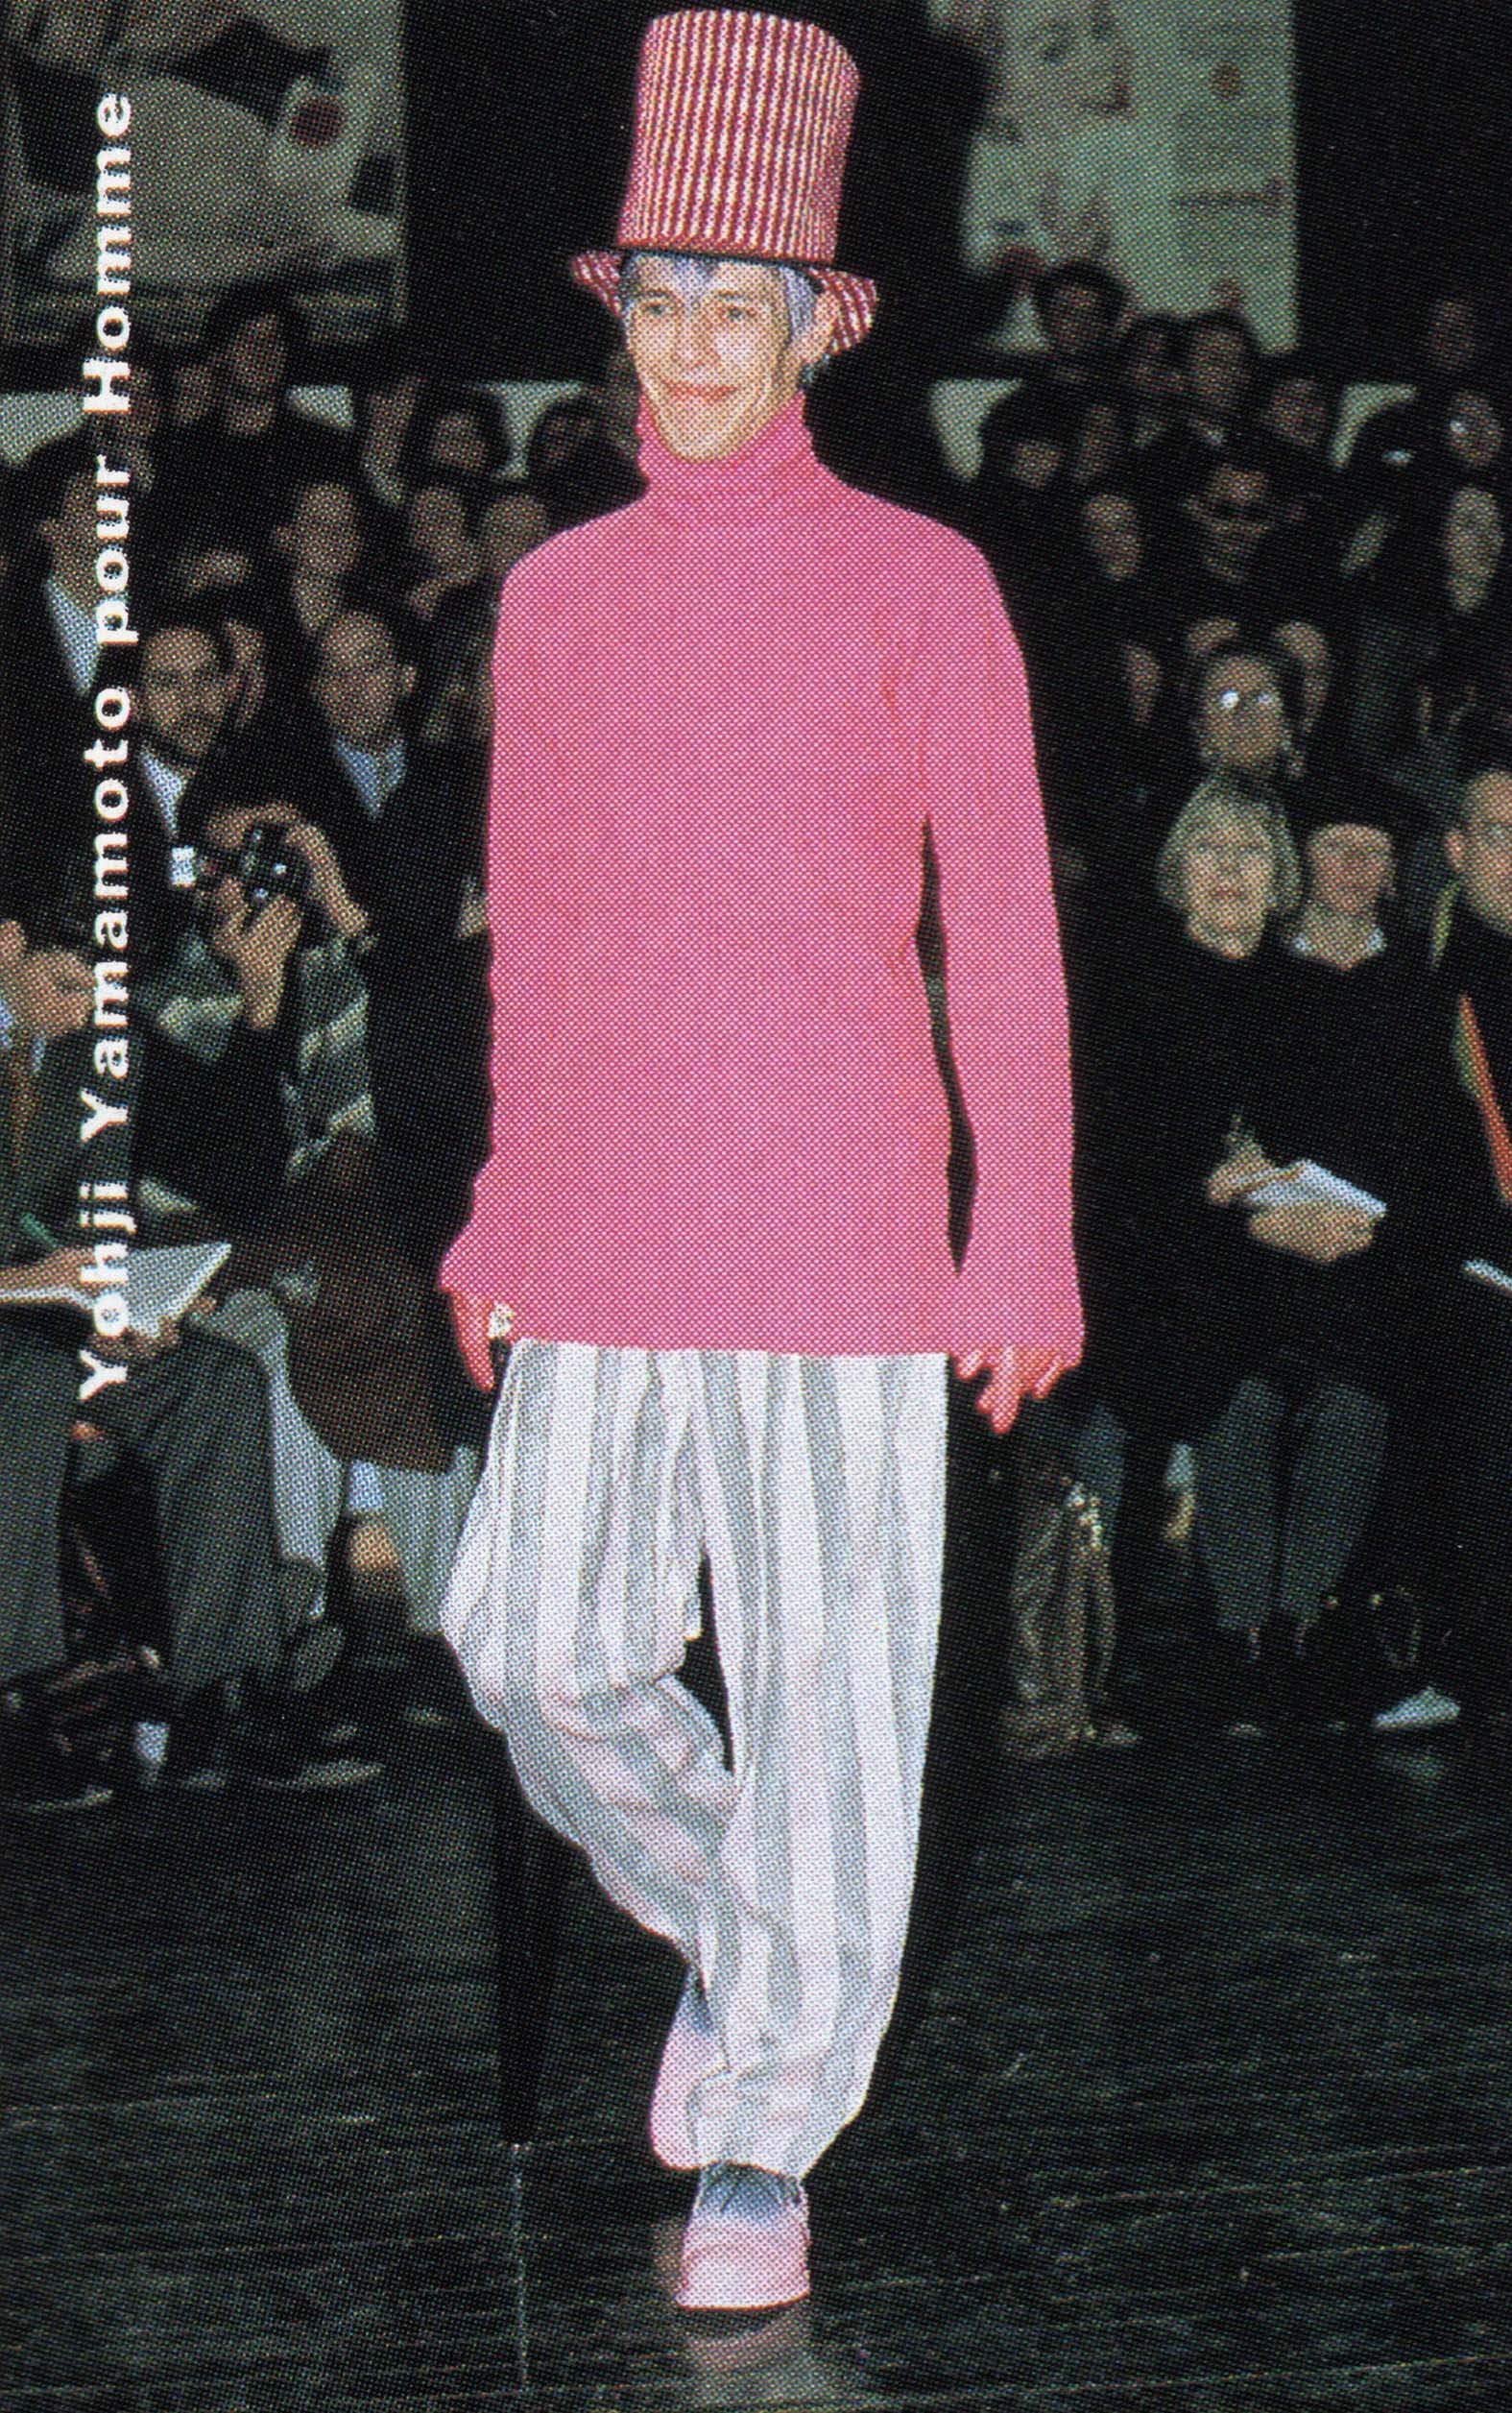 Yohji Yamamoto Pour Homme, Autumn/Winter 1994-1995 — My Clothing Archive